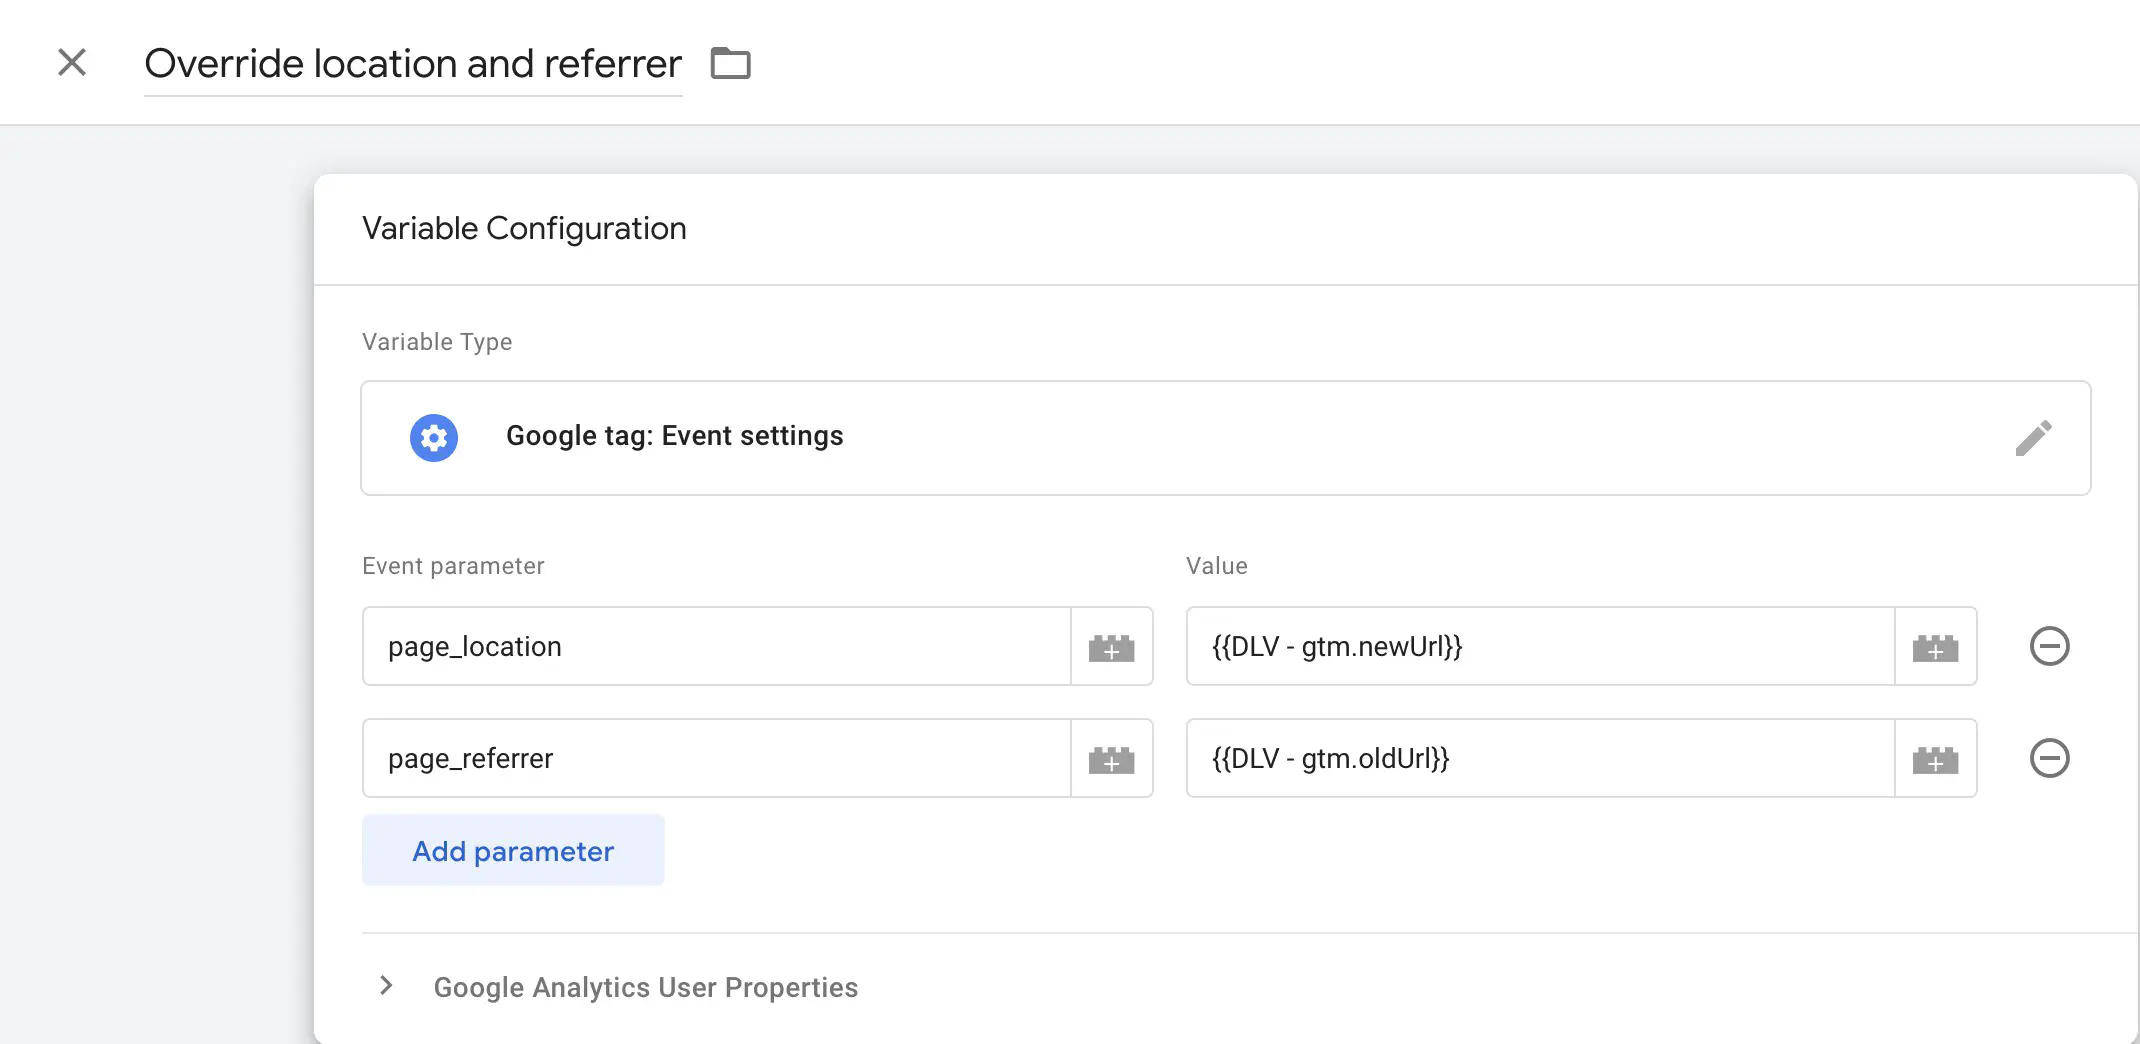 Use the Google tag: Event settings variable to fill in the page_location and page_referrer parameters.